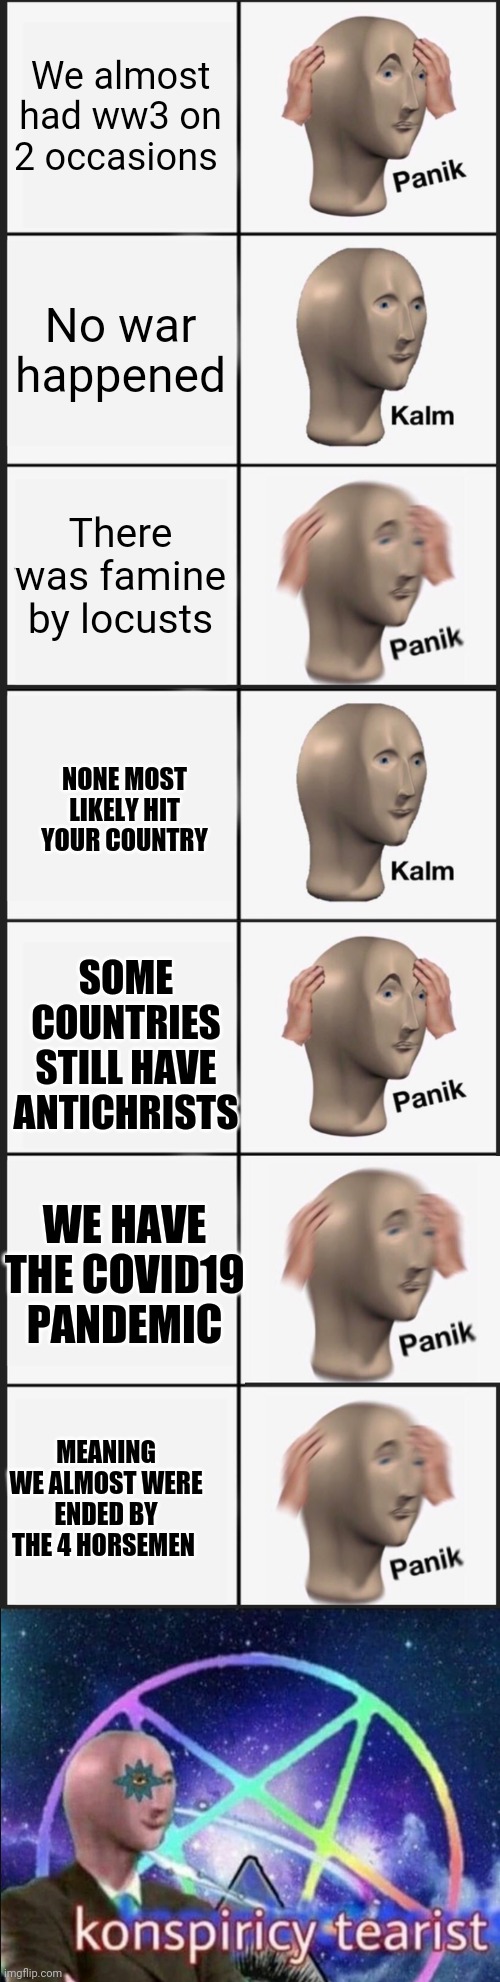 We almost had ww3 on 2 occasions; No war happened; There was famine by locusts; NONE MOST LIKELY HIT YOUR COUNTRY; SOME COUNTRIES STILL HAVE ANTICHRISTS; WE HAVE THE COVID19 PANDEMIC; MEANING WE ALMOST WERE ENDED BY THE 4 HORSEMEN | image tagged in memes,panik kalm panik,konspiricy tearist,4 horsemen,conspiracy theory,meme man | made w/ Imgflip meme maker